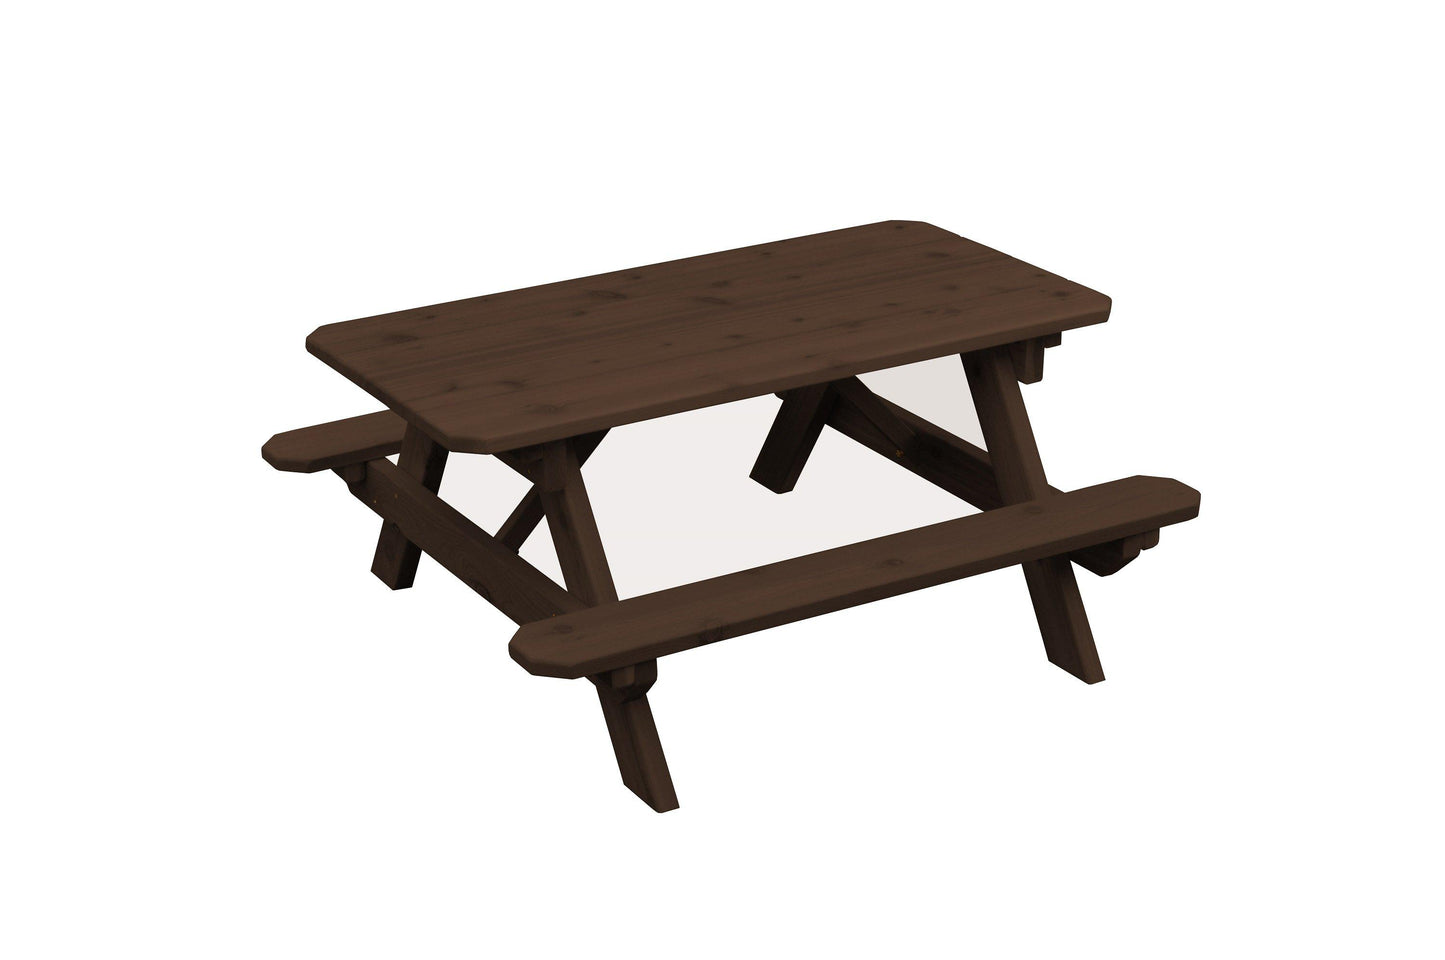 A&L FURNITURE CO. Western Red Cedar Kid's Table (22" Wide)- Specify for FREE 2" Umbrella Hole - LEAD TIME TO SHIP 2 WEEKS